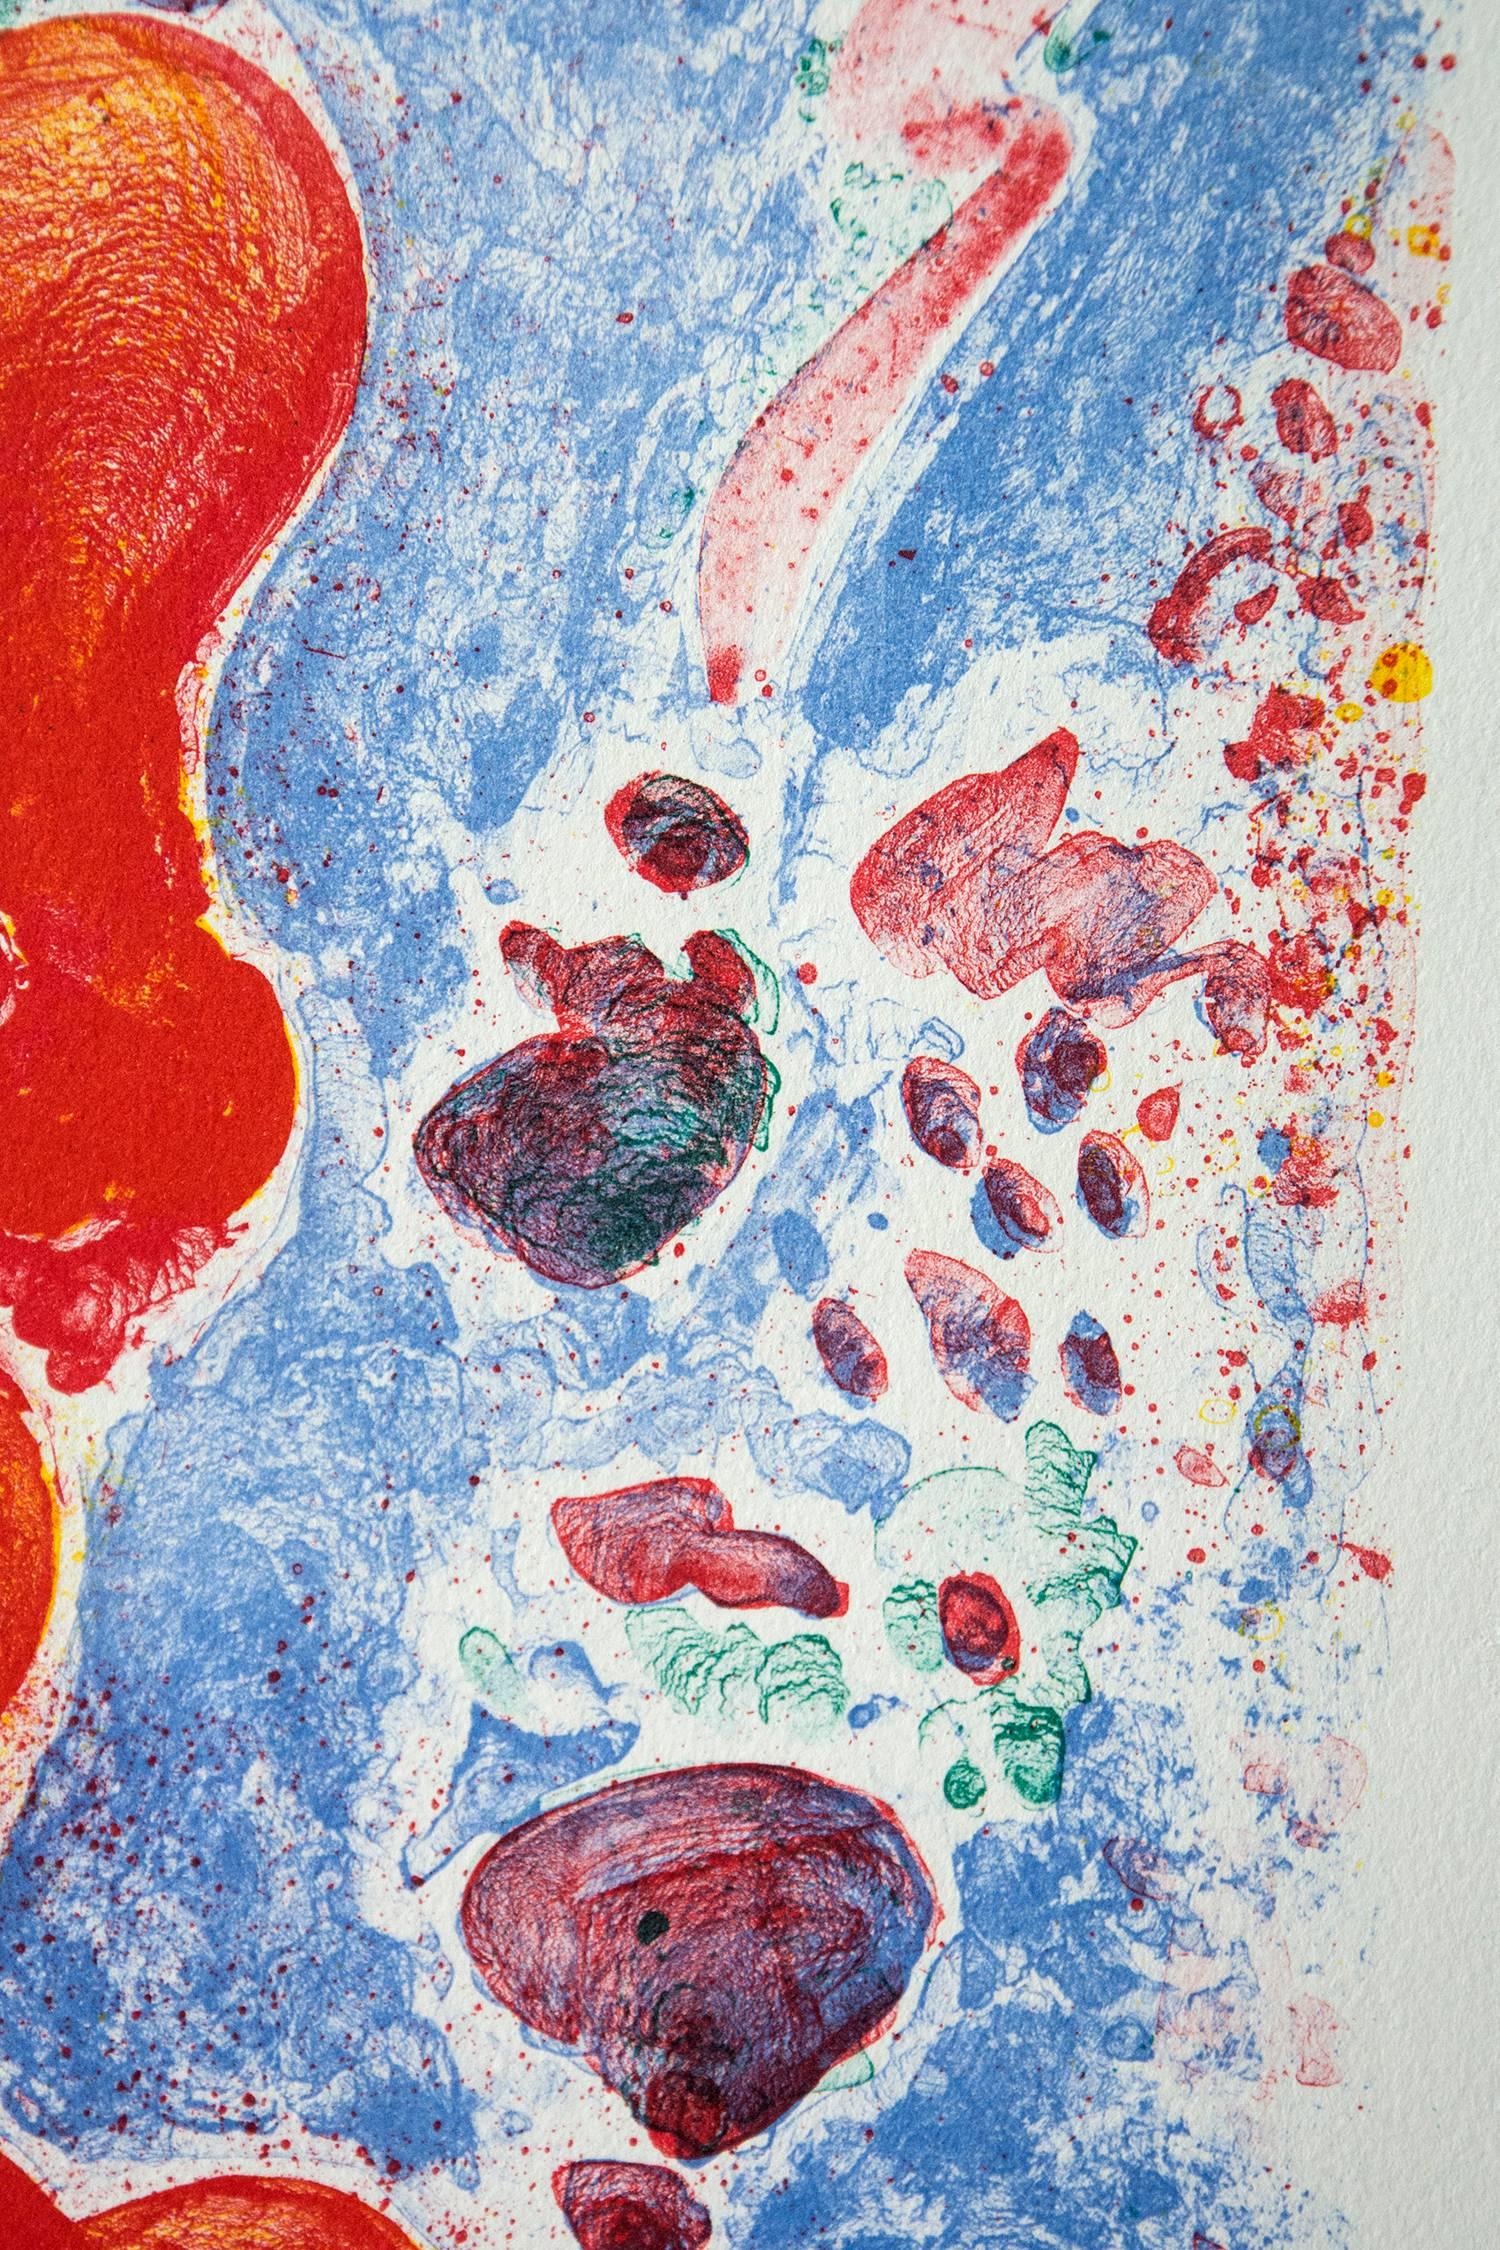 Aquatic forms in indigo, green, maroon and red swirl and intersect on a ground of periwinkle in this lithograph by celebrated Canadian artist Paul Fournier. This print from a series of six coral reef inspired images created in 2001 is number 22 in